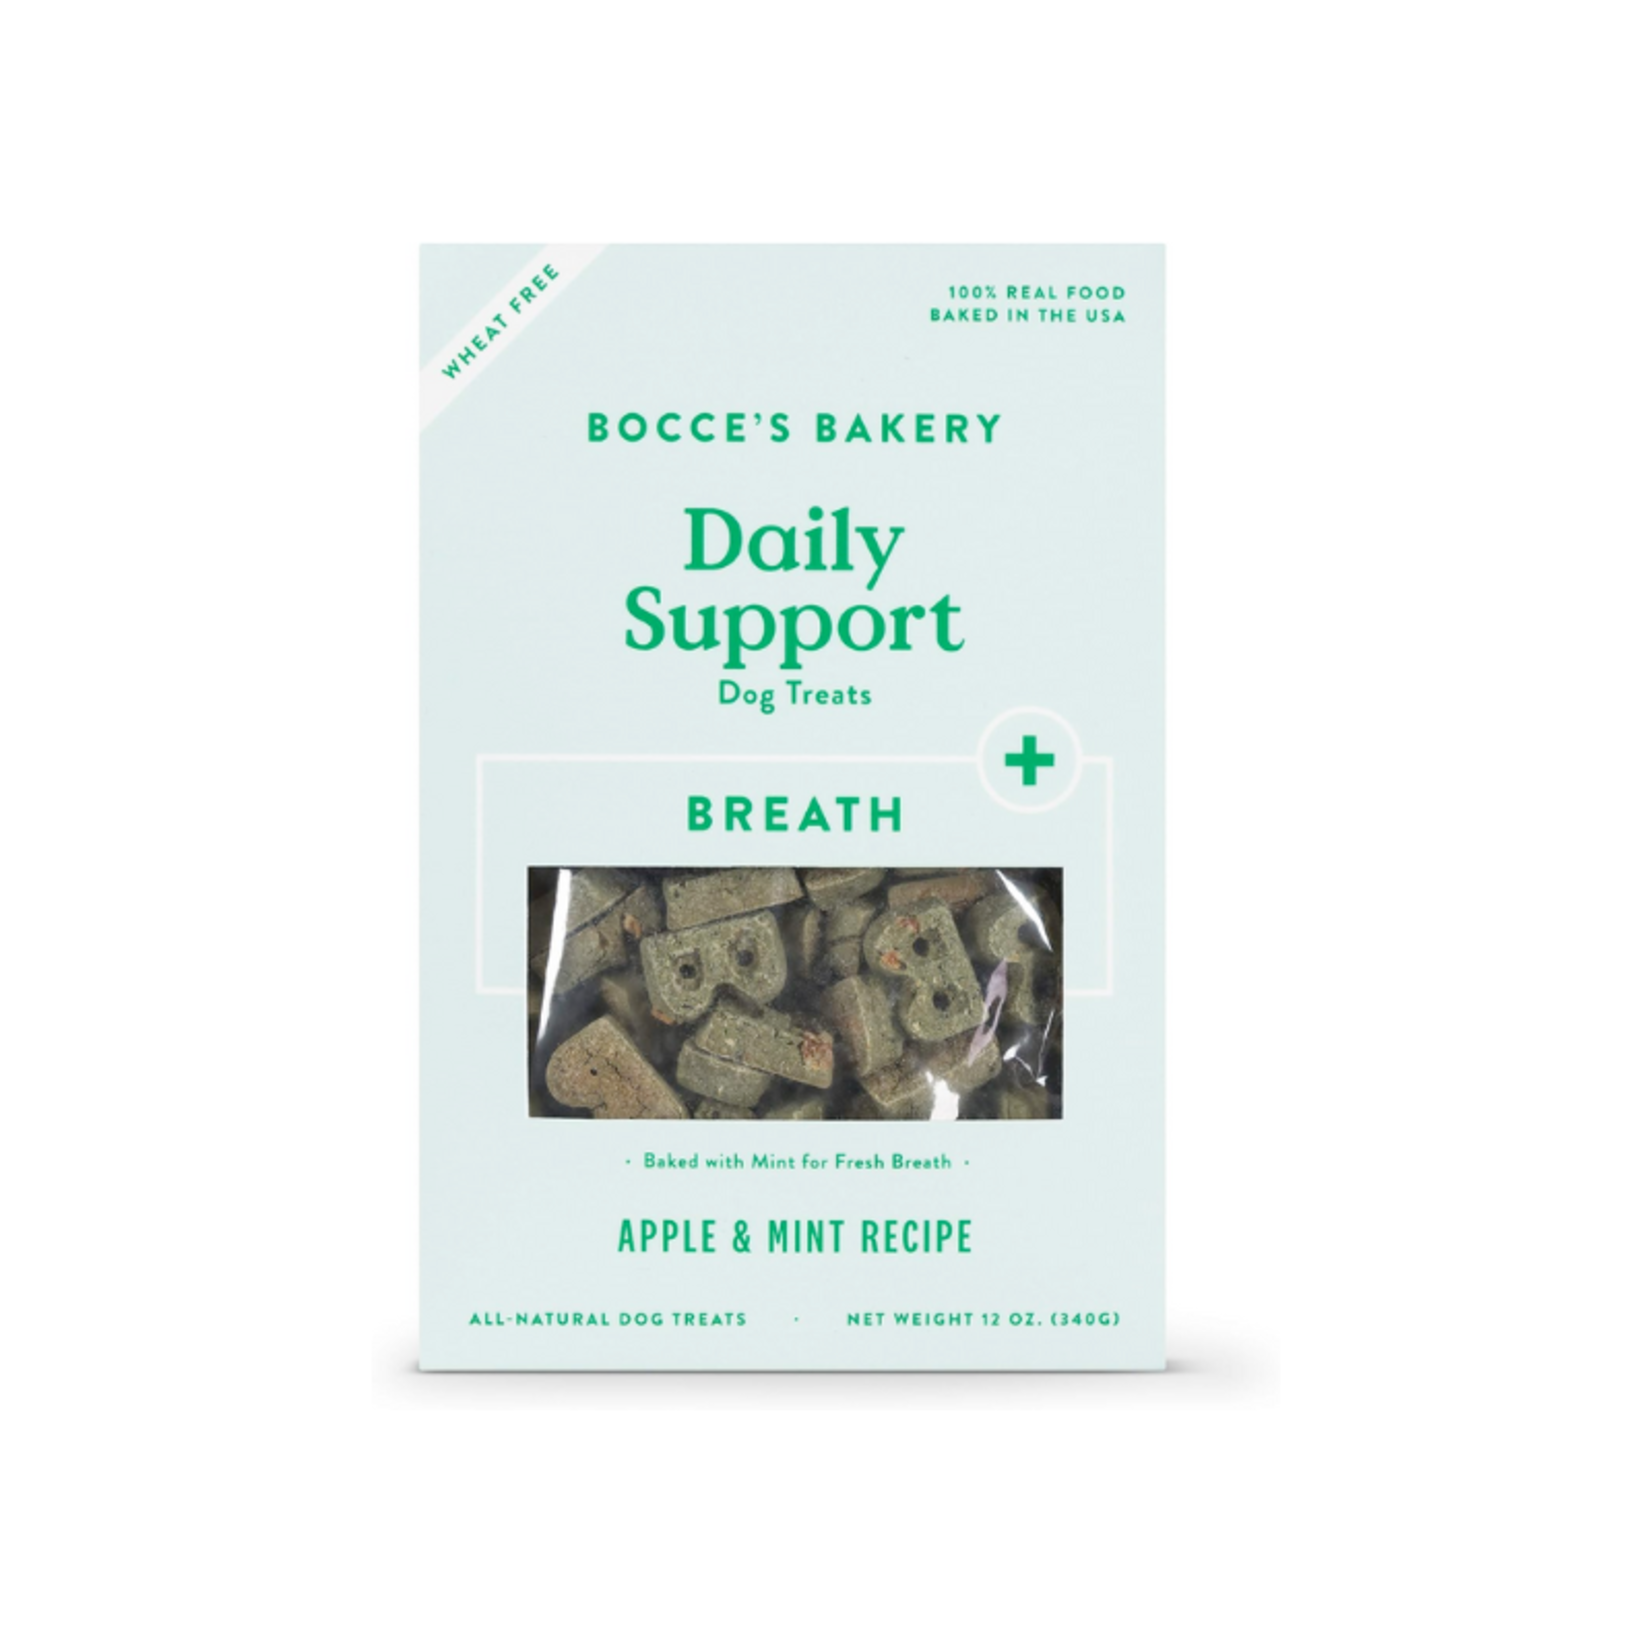 Bocce's Bakery 12 oz. - Apple & Mint - Breath Daily Support Biscuit - Bocce's Bakery